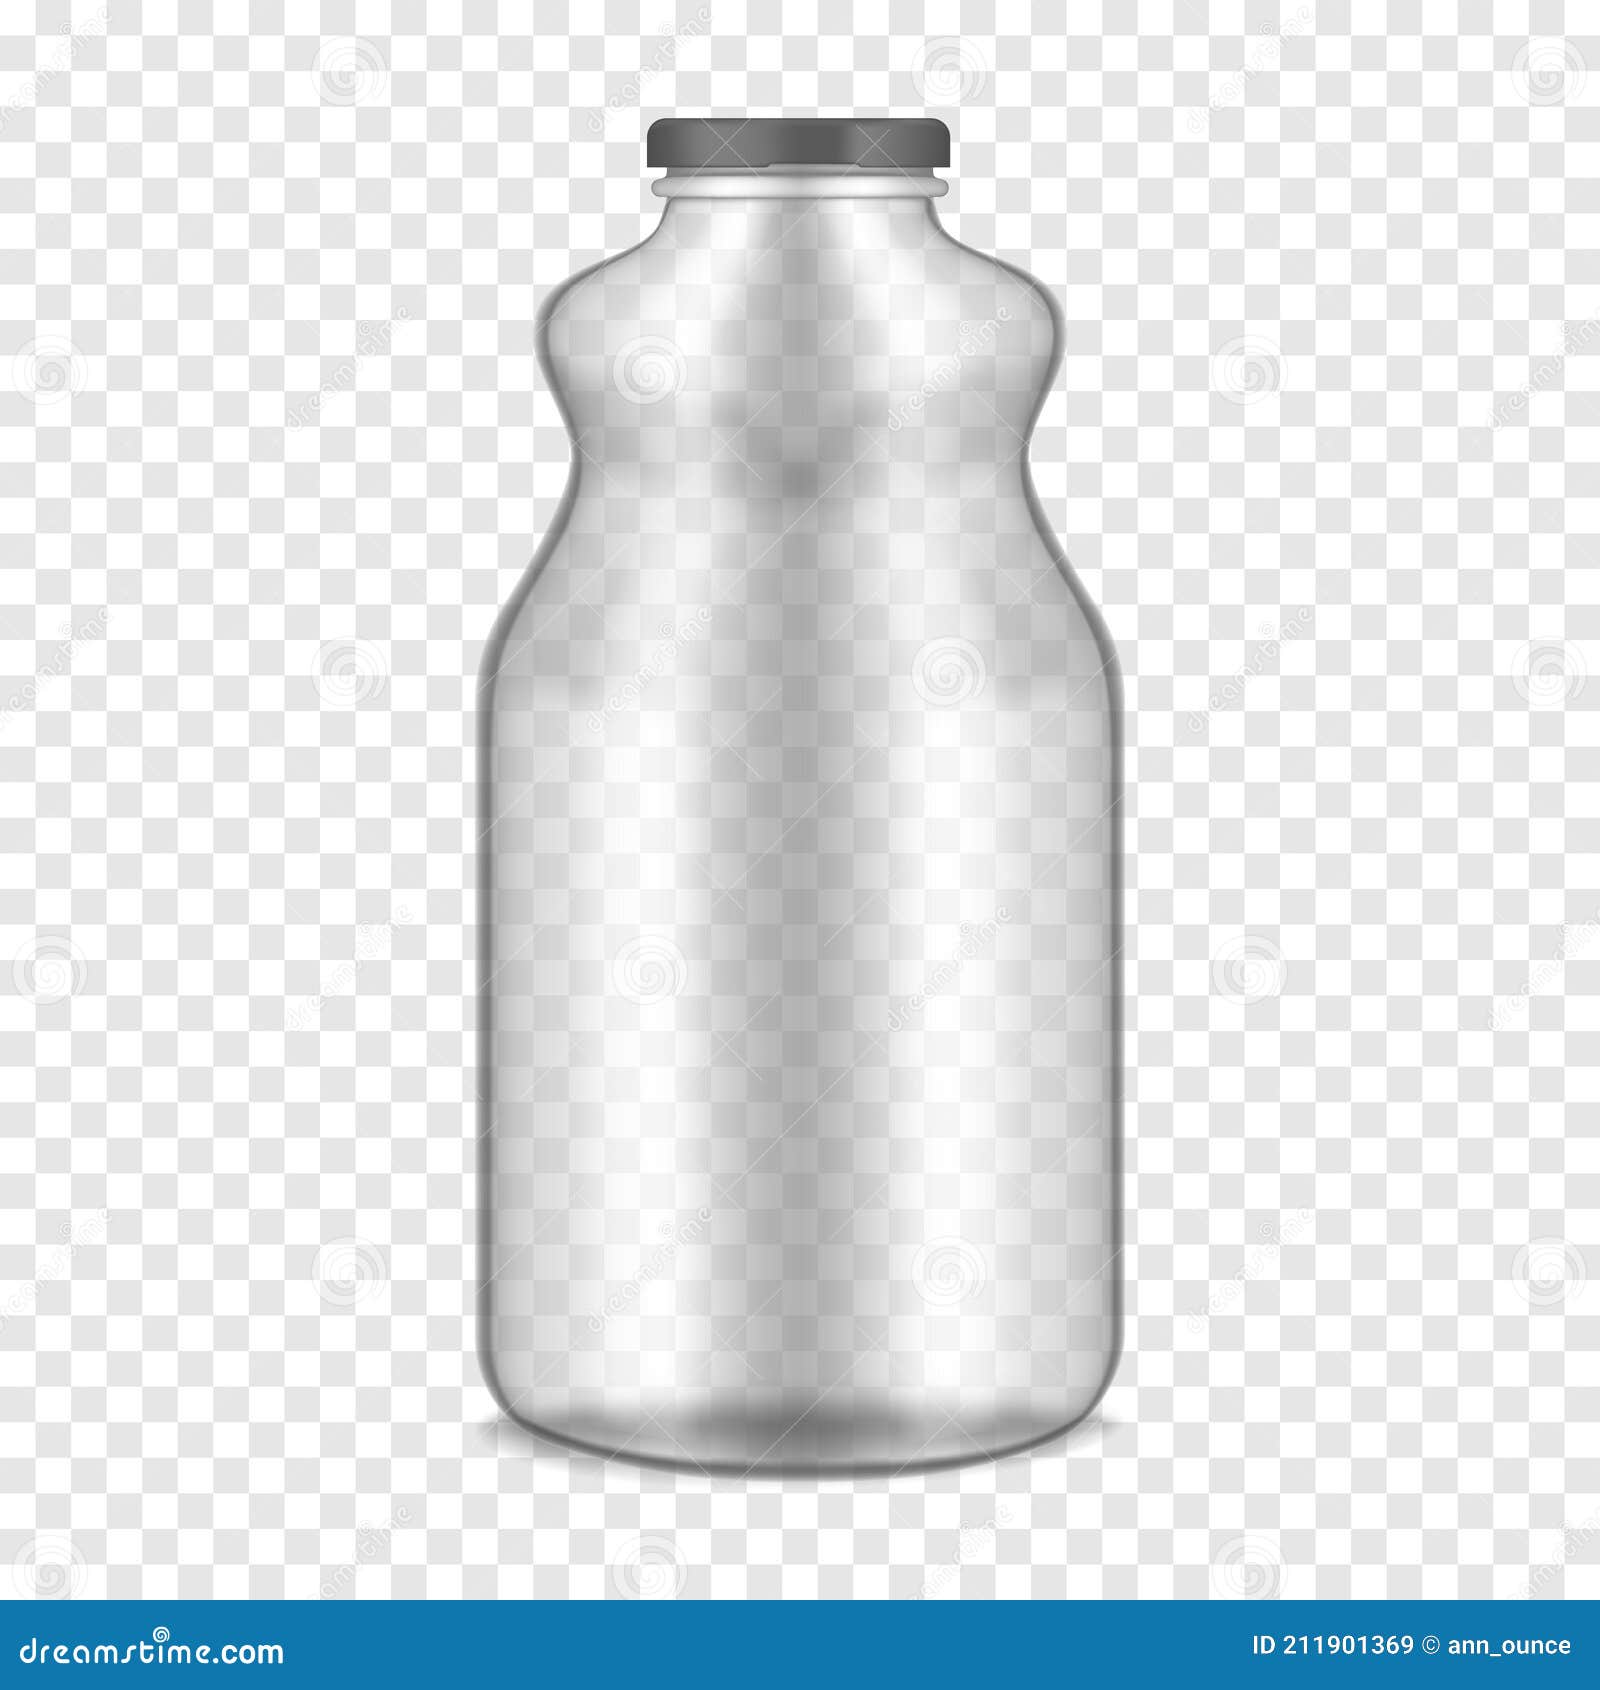 Clear water bottle on transparent background. Realistic vector